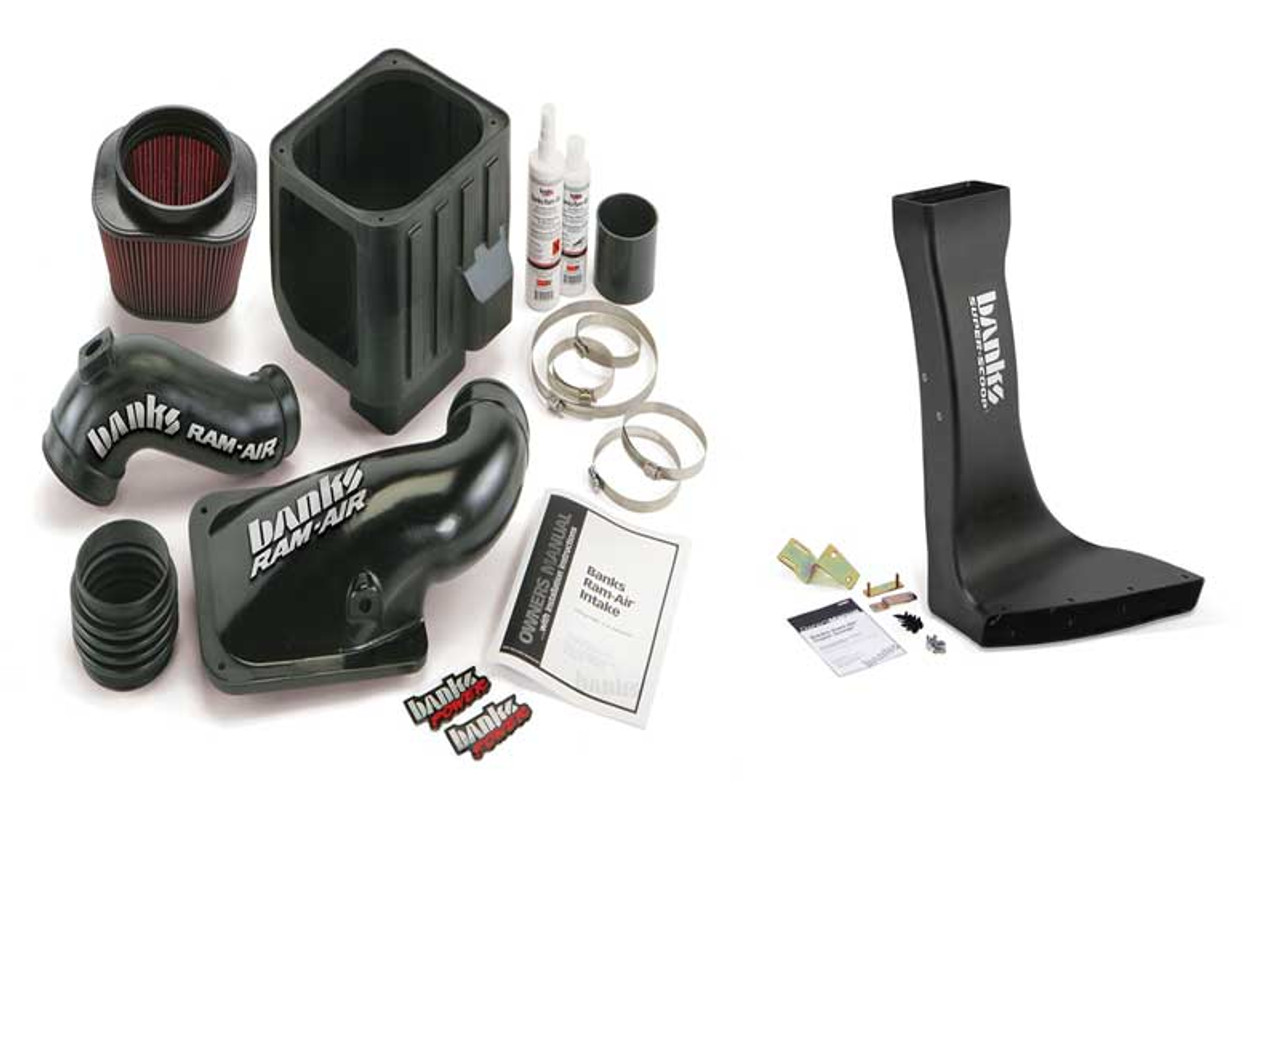 Banks Ram-Air Intake and Scoop 03-04 GMC only